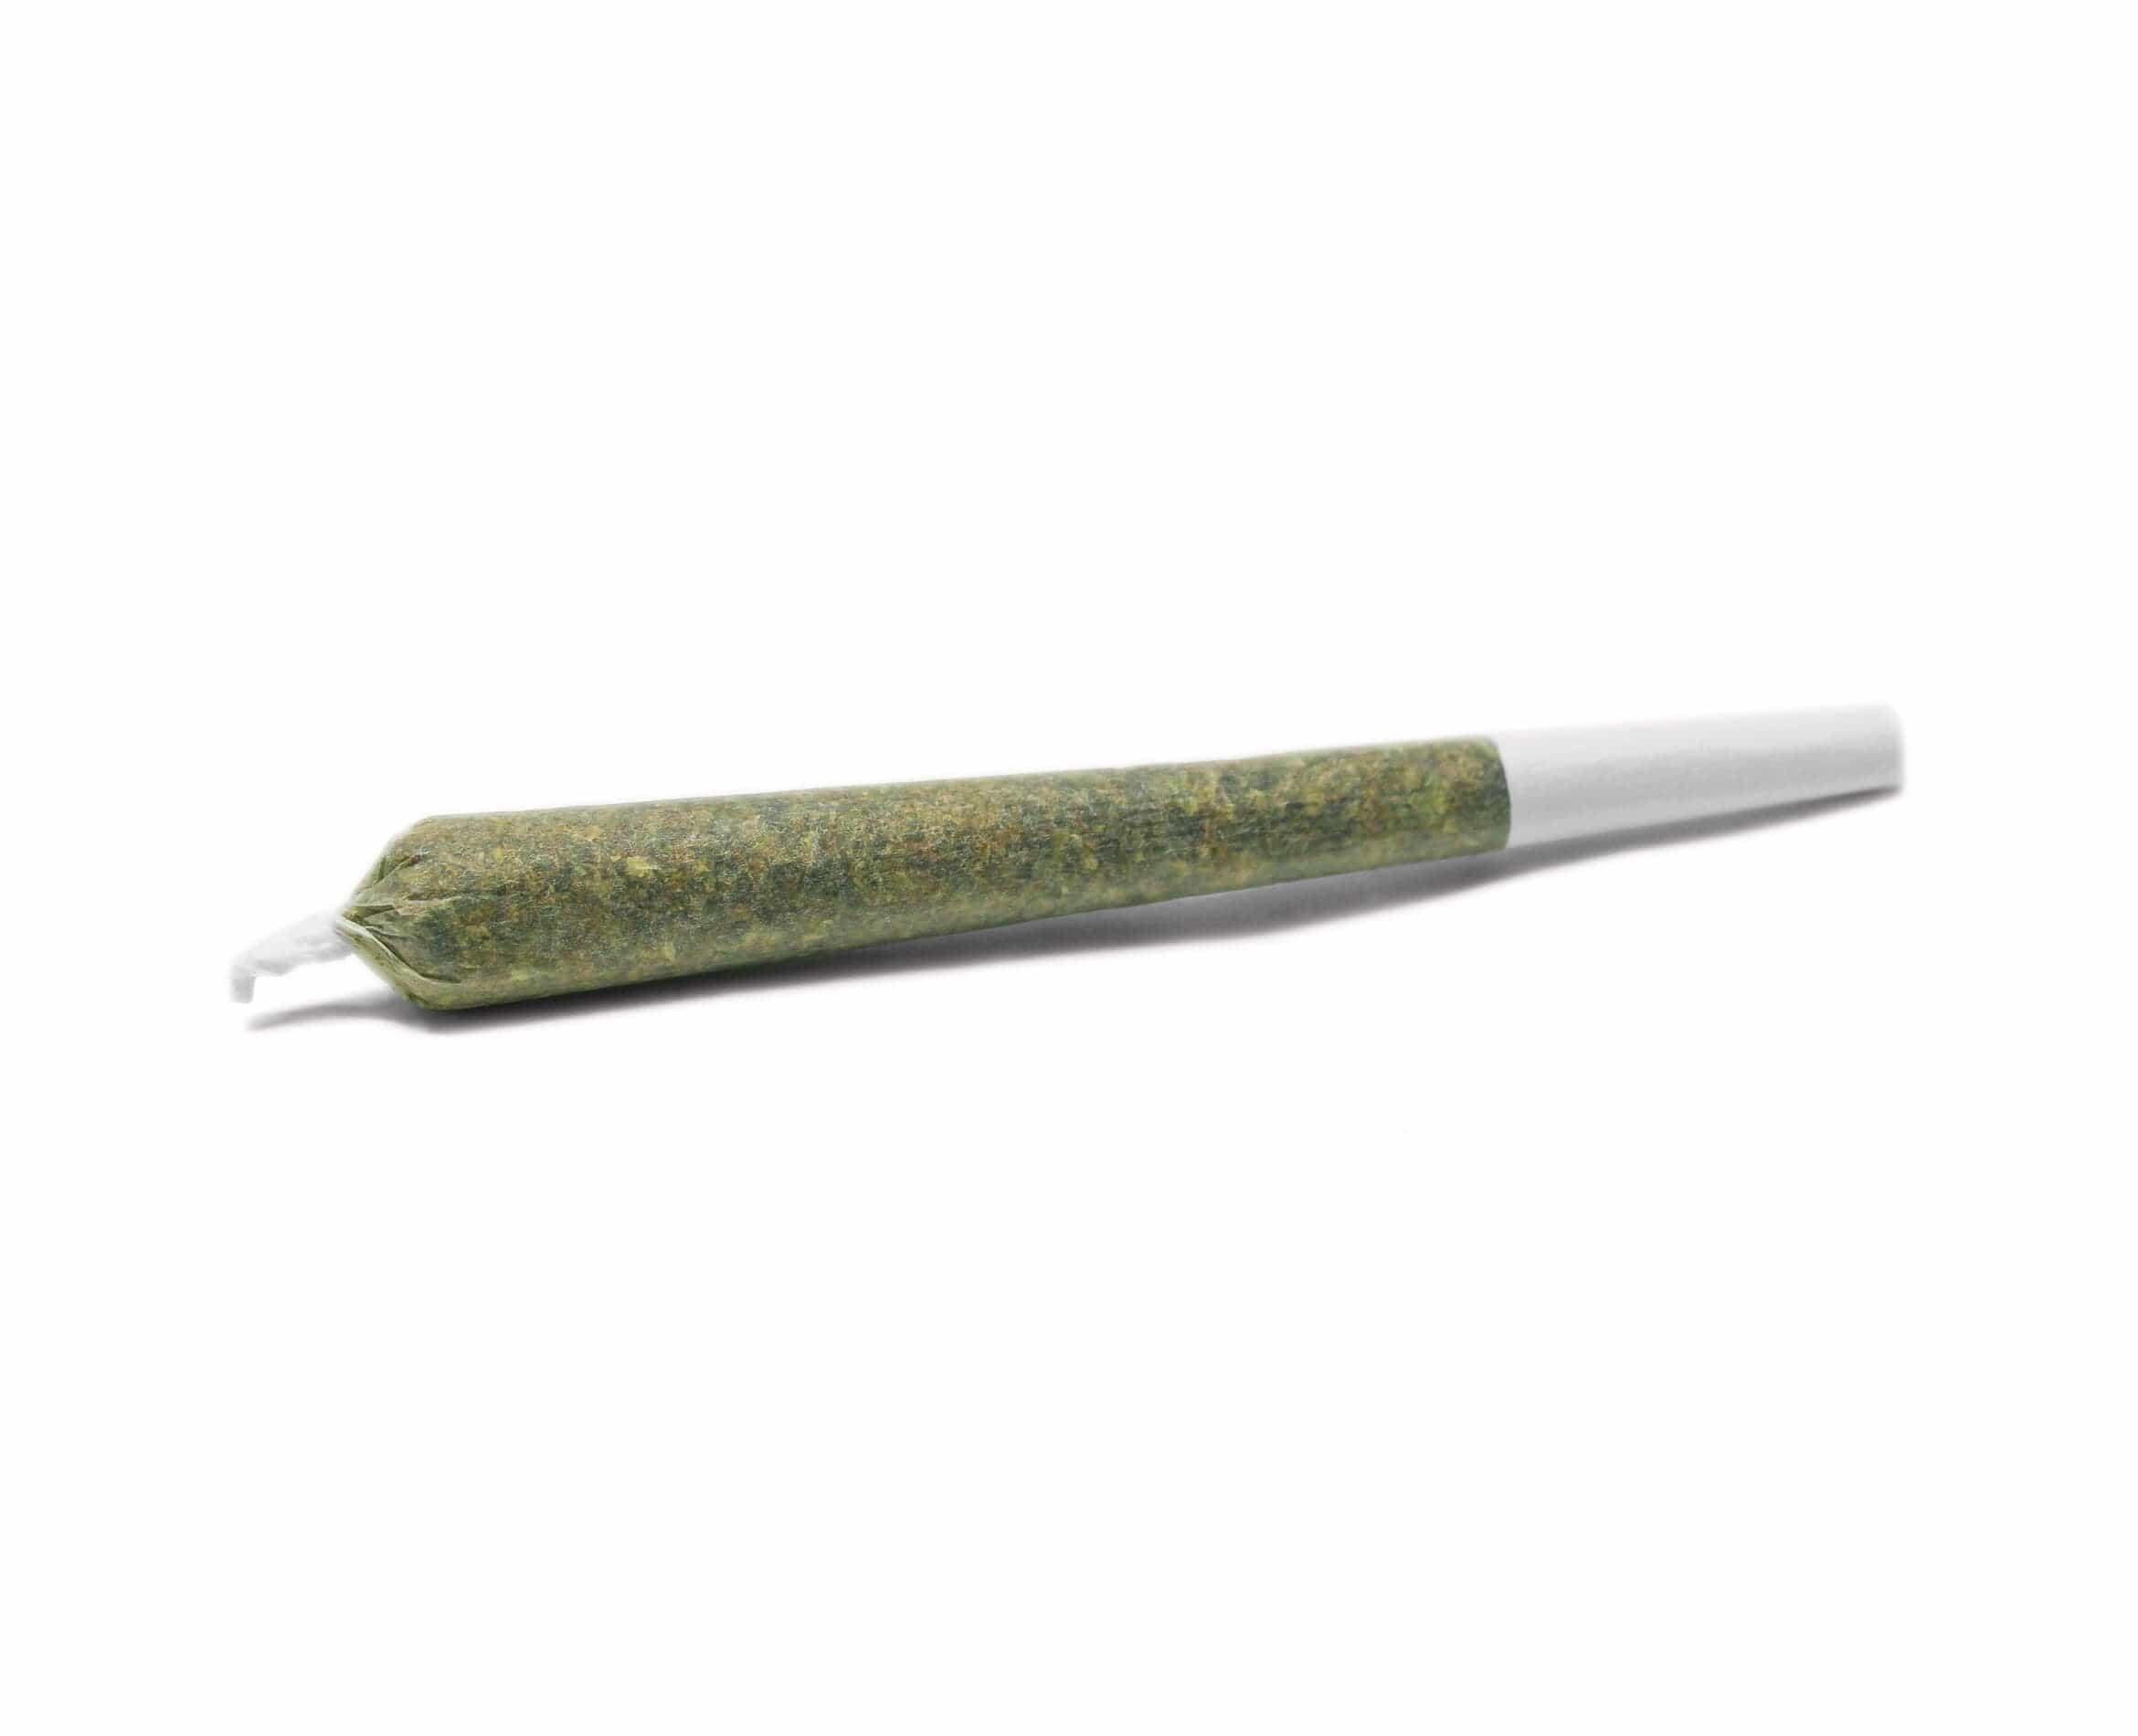 Spinach Pre Roll Packs